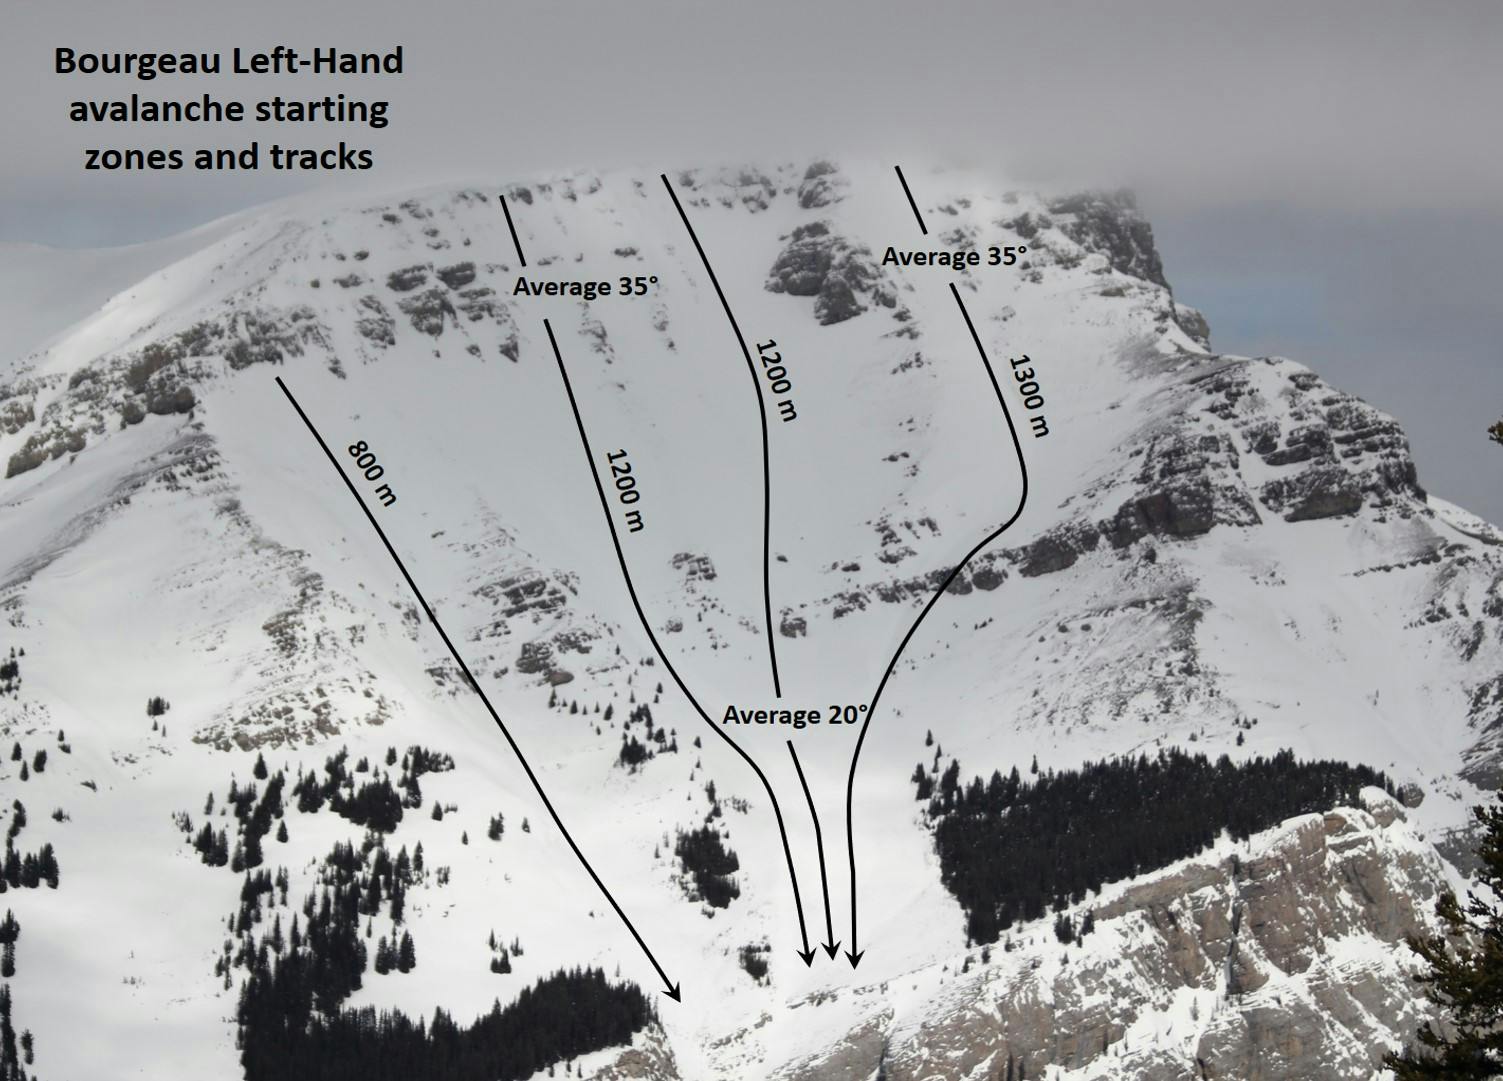 This image shows the starting zone and four avalanche tracks above the Bourgeau Left ice climb. From left, the tracks are 800 m, 1,200 m, 1,200 m, and 1,300 m long. The average start zone is 35 degrees steep.